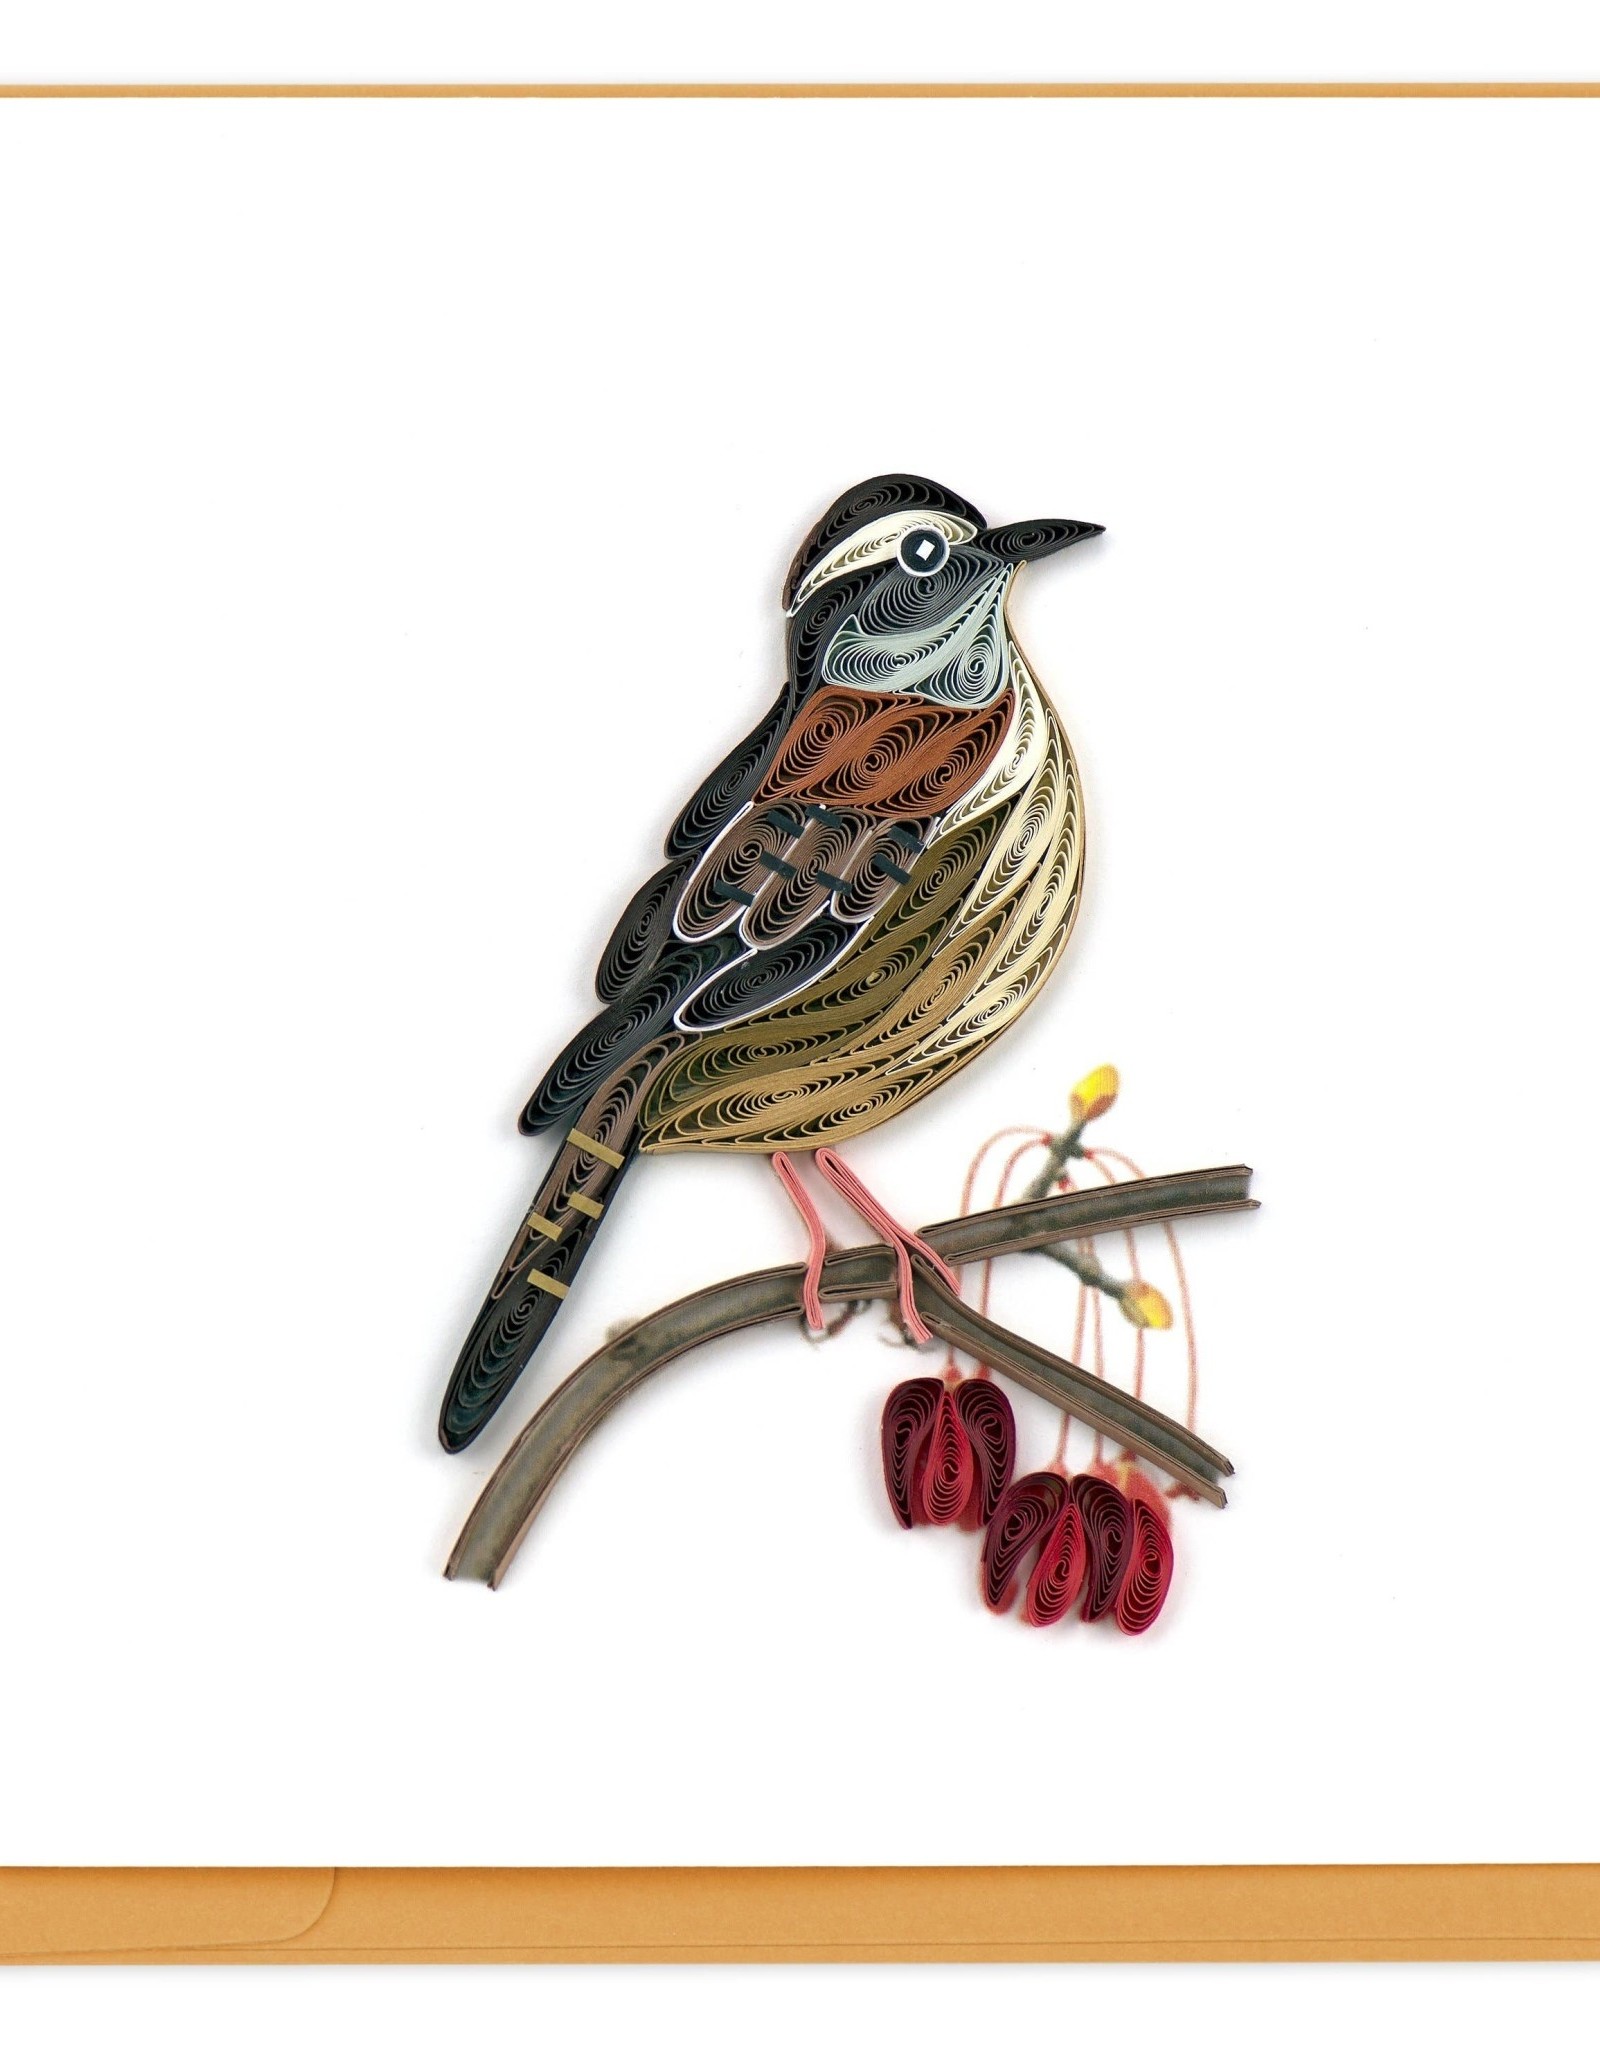 Quilling Card Quilled Great Carolina Wren Greeting Card